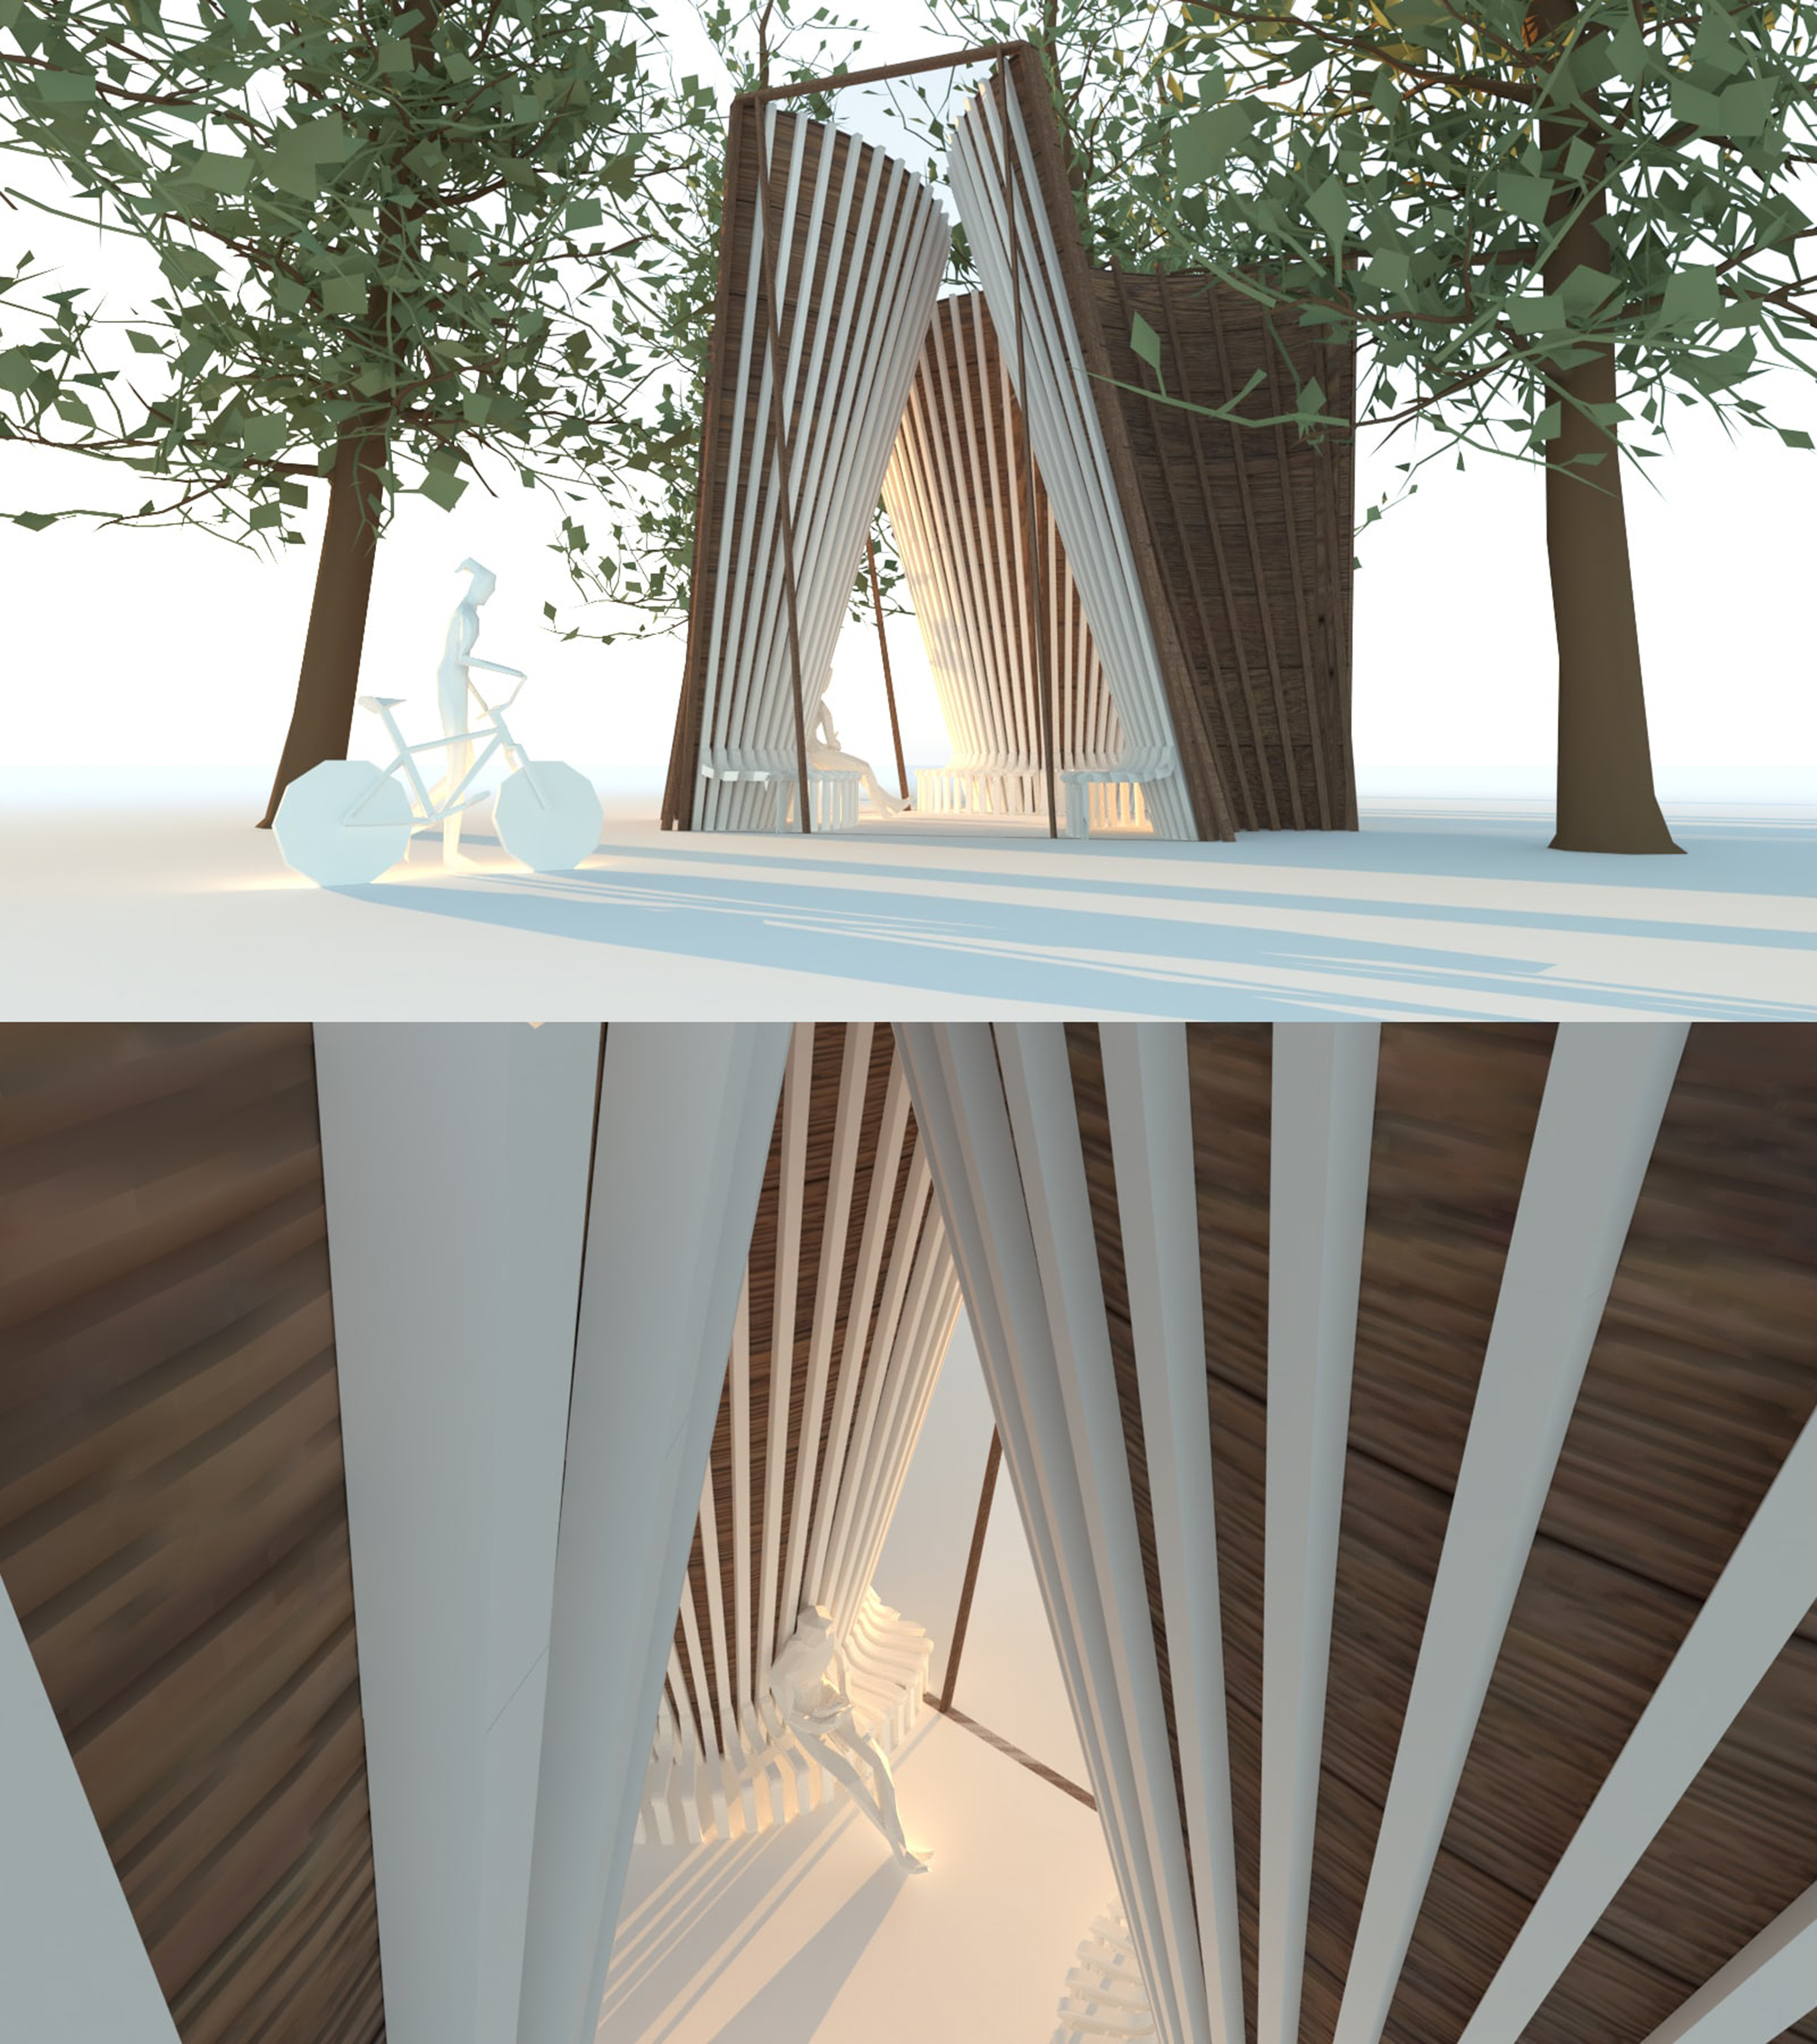 Two alternate digital architectural renderings of the same triangular building